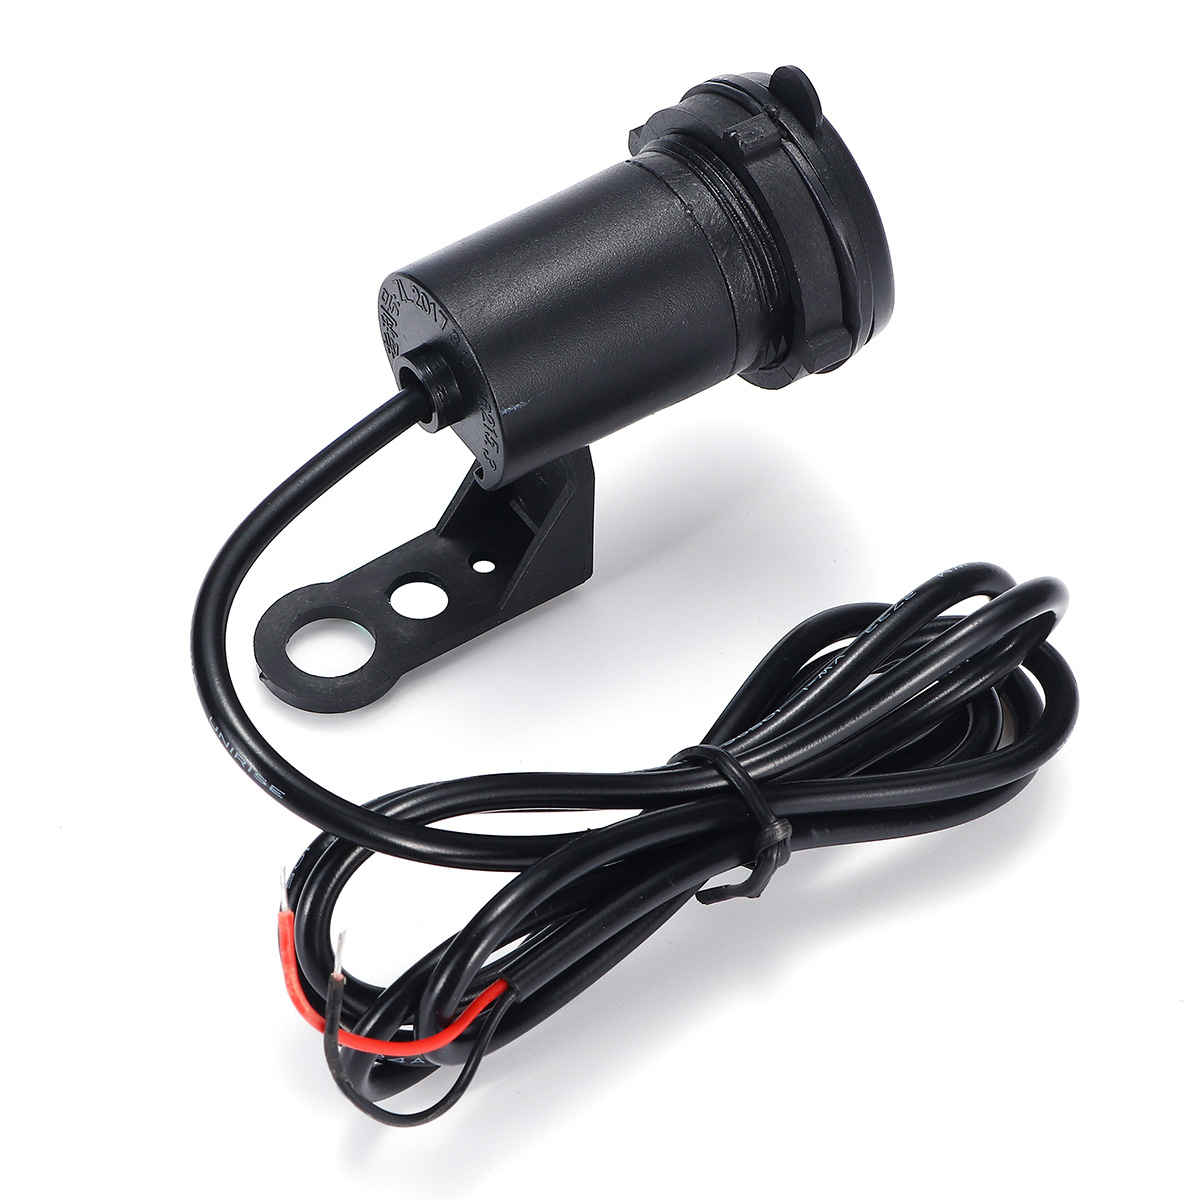 Waterproof 9-24V Motorcycle Mobile Phone USB Charger 2.1A Power Adapter Socket